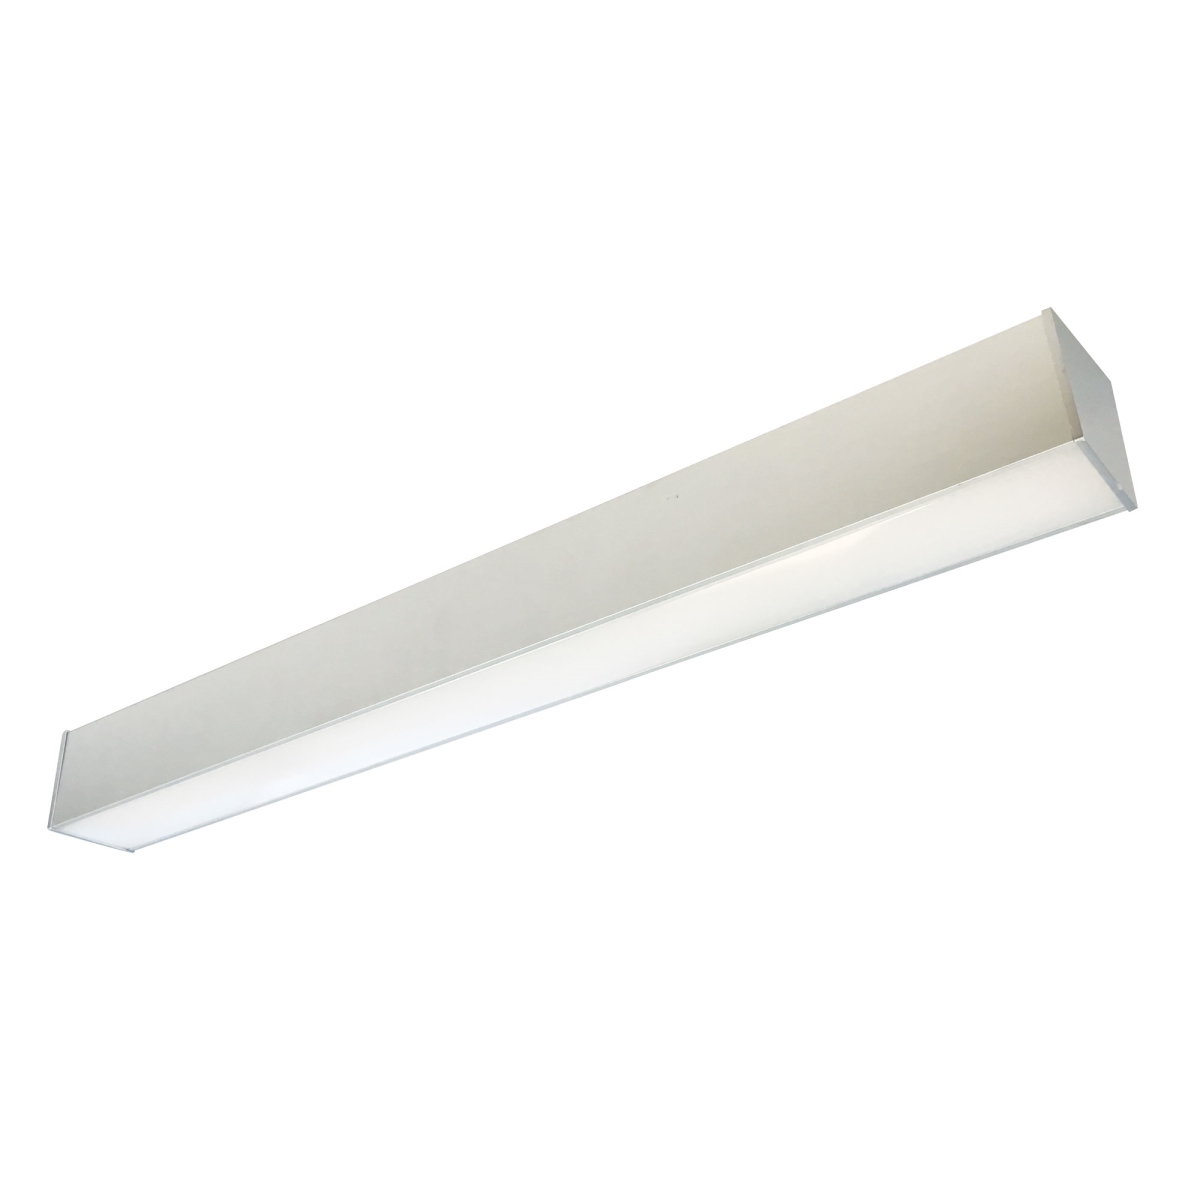 Picture of Nora Lighting NLIN-81035A-A 8 ft. 3500K L-line Linear LED, Aluminum